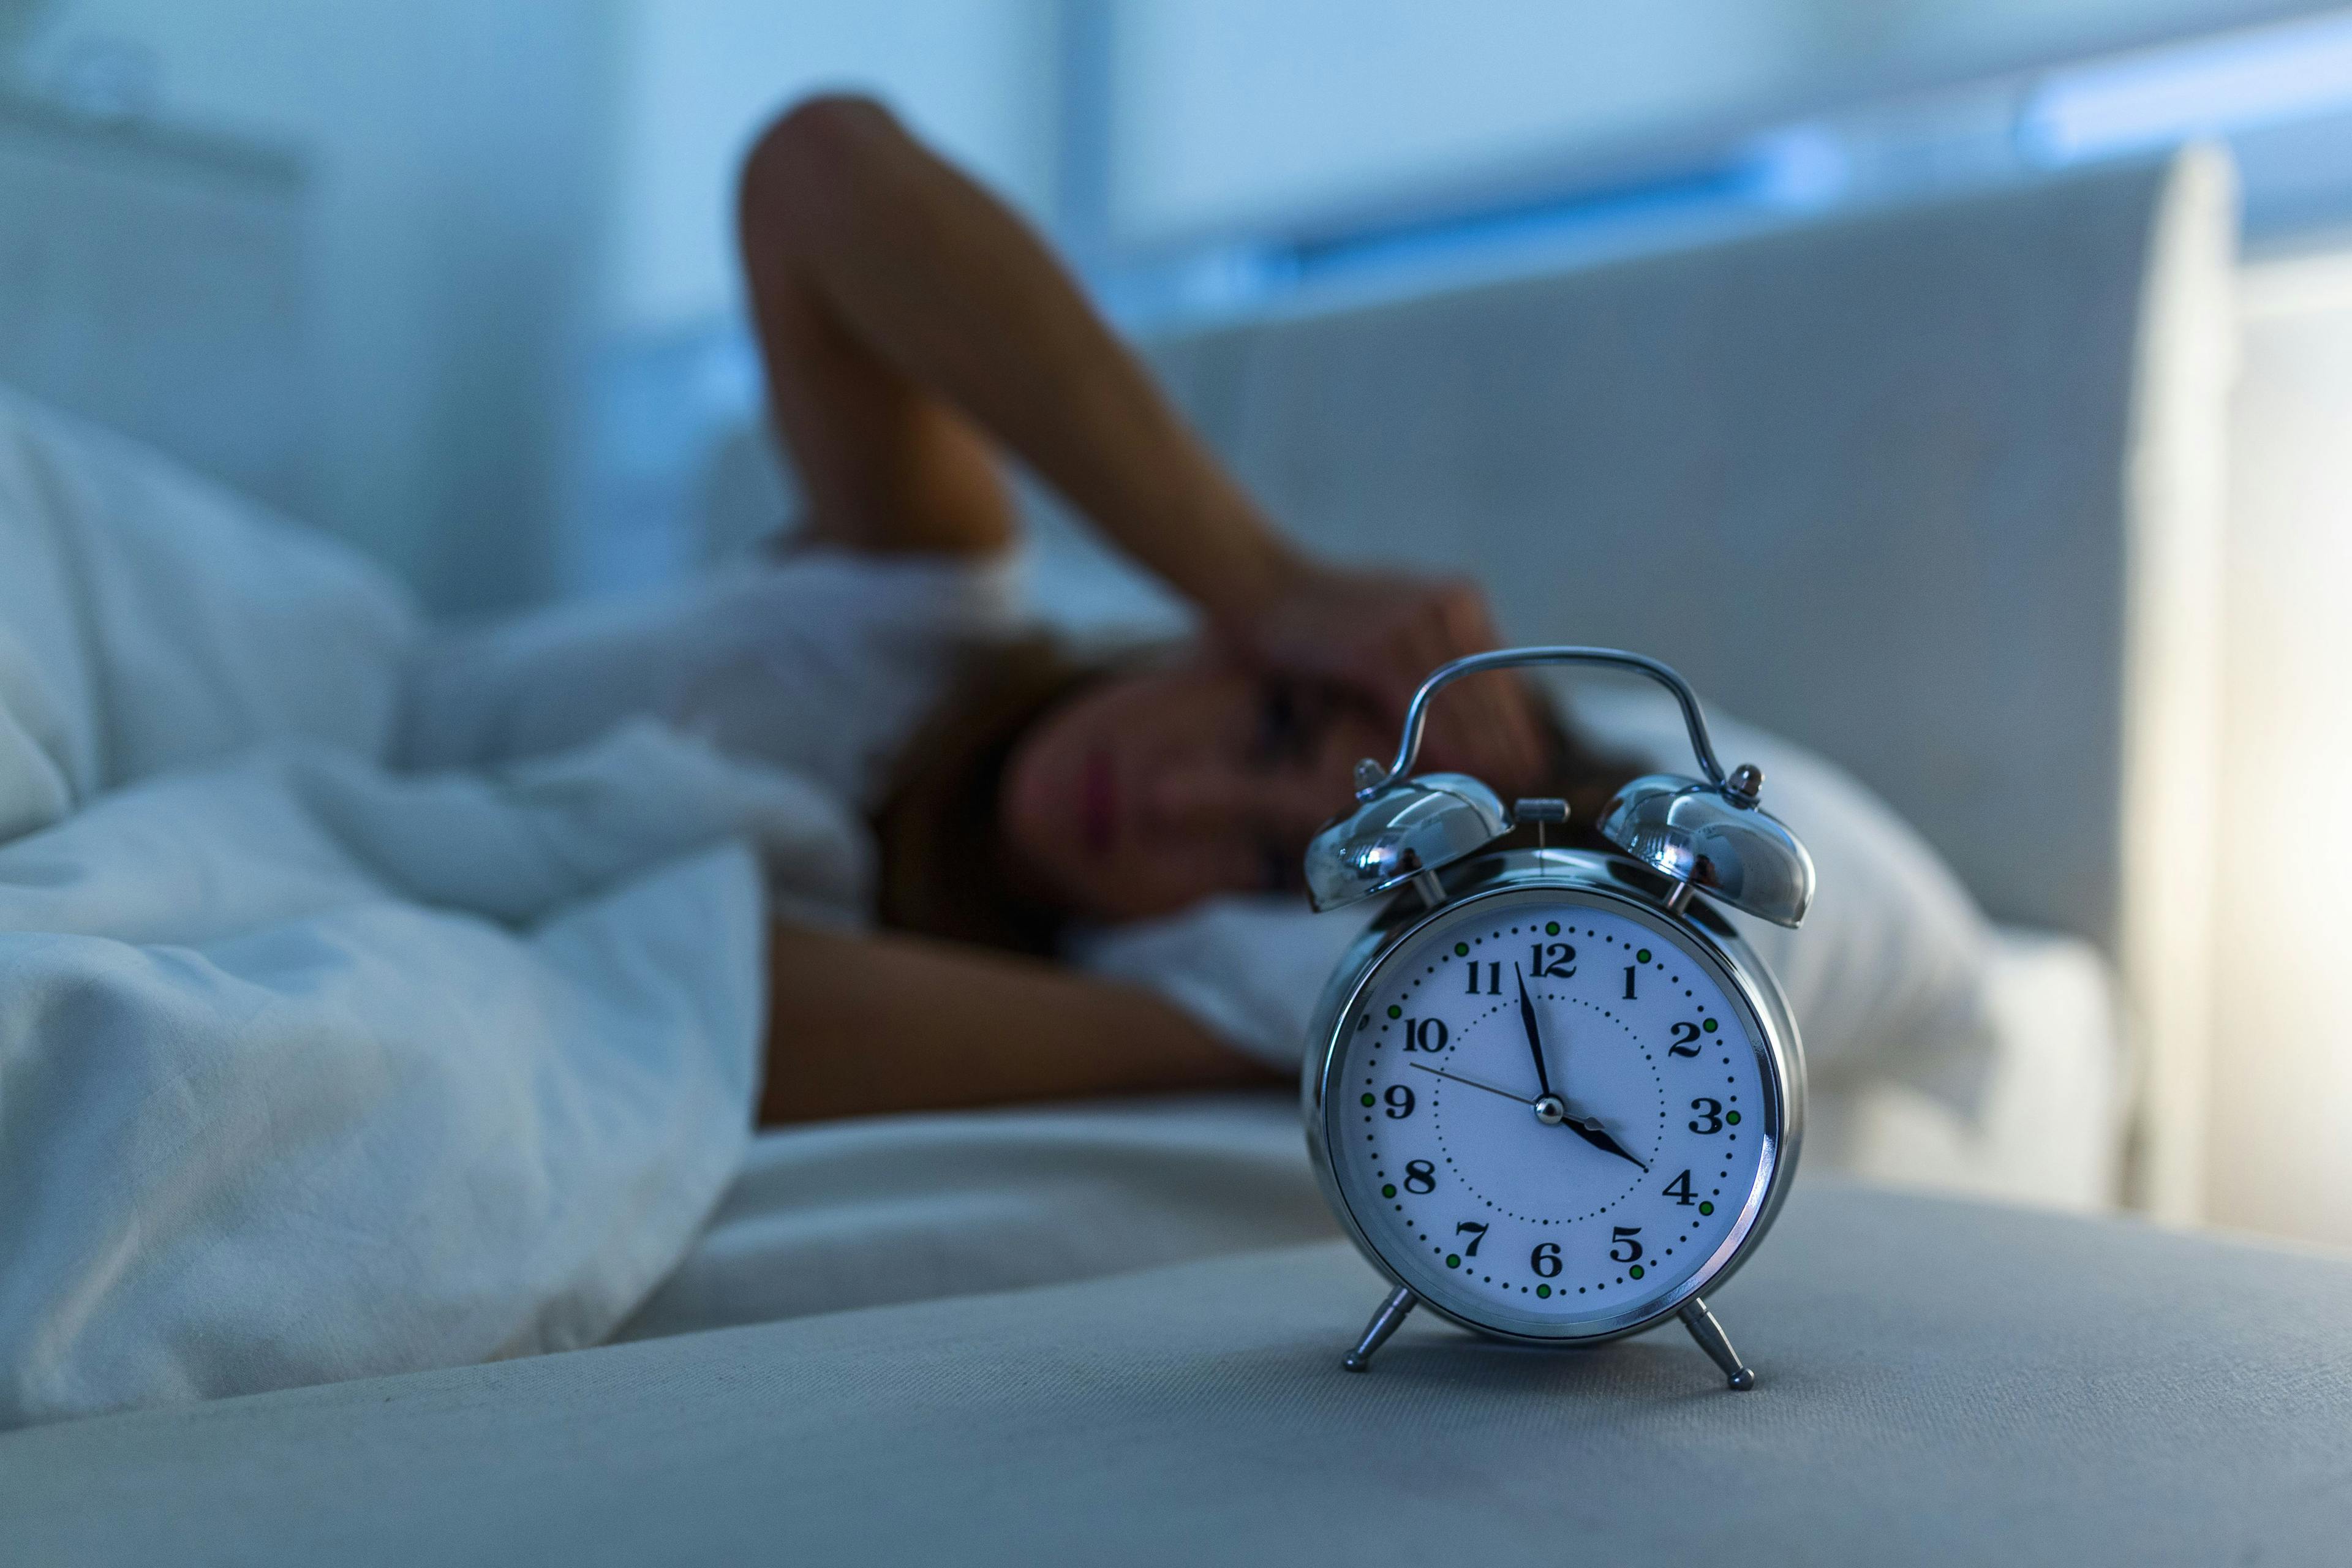 Woman with insomnia | Image credit: Graphicroyalty - stock.adobe.com